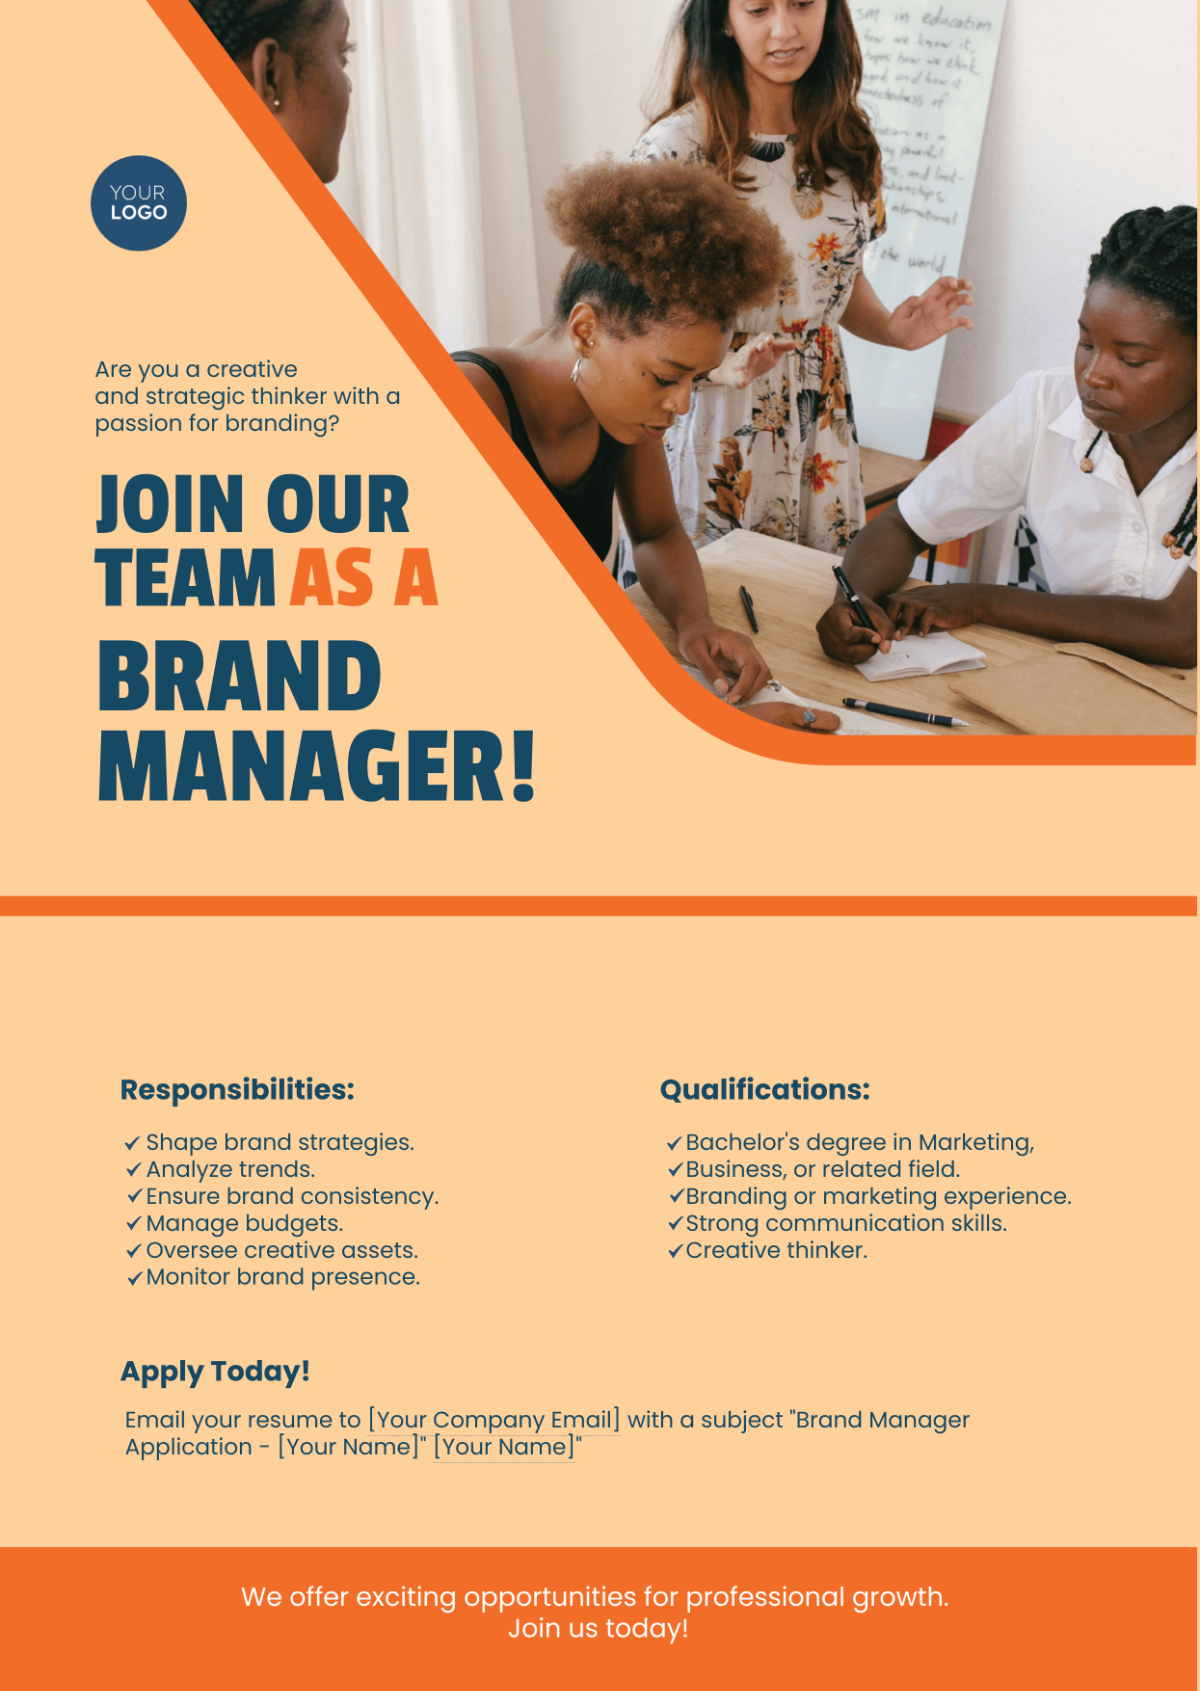 Brand Manager Job Ad Template